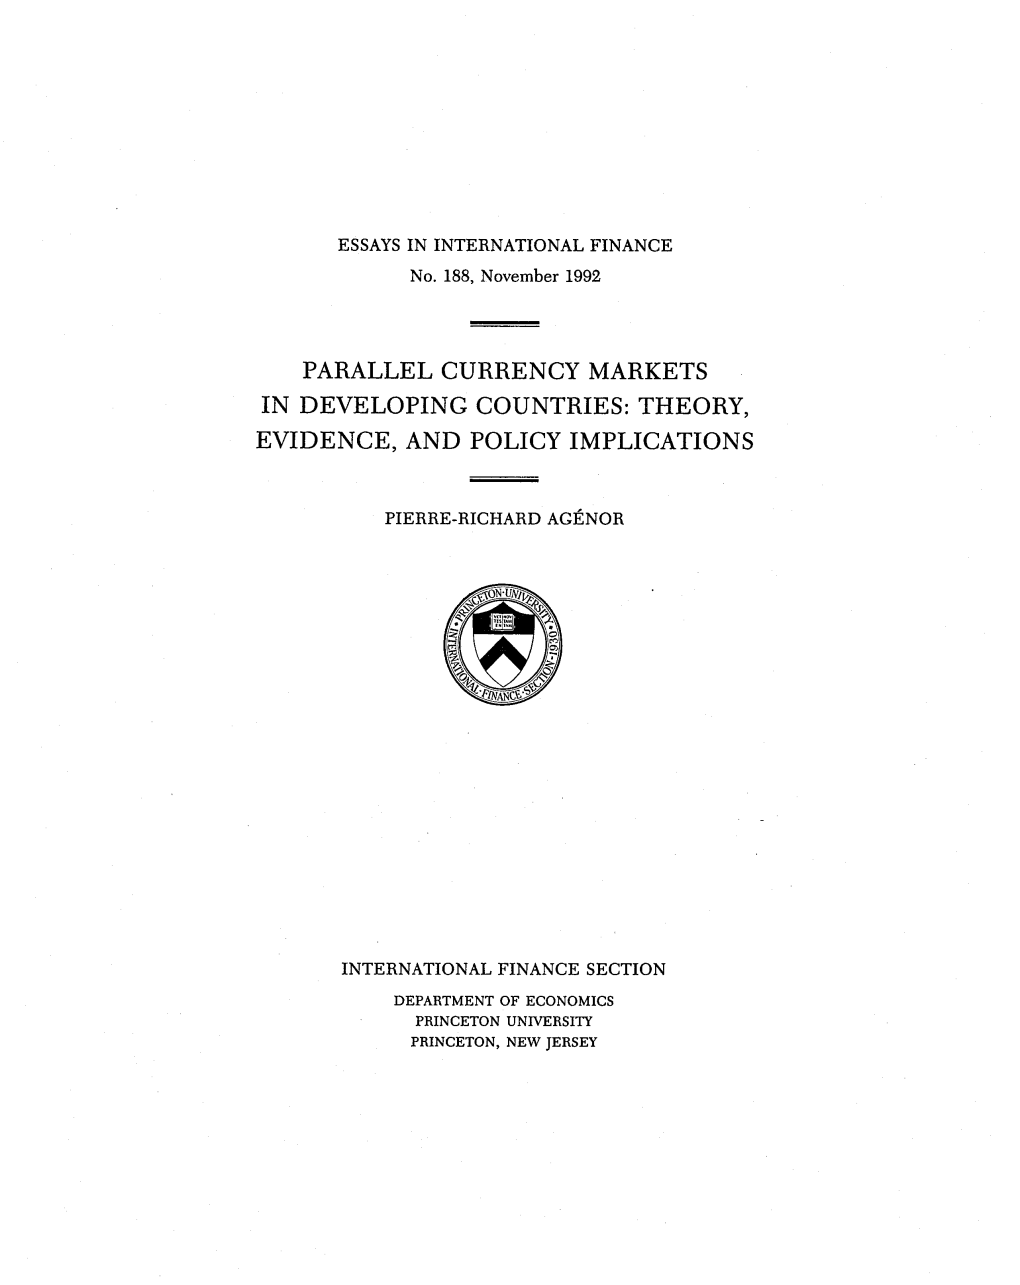 Parallel Currency Markets in Developing Countries : Theory, Evidence, and Policy Implications / Pierre-Richard Agénor